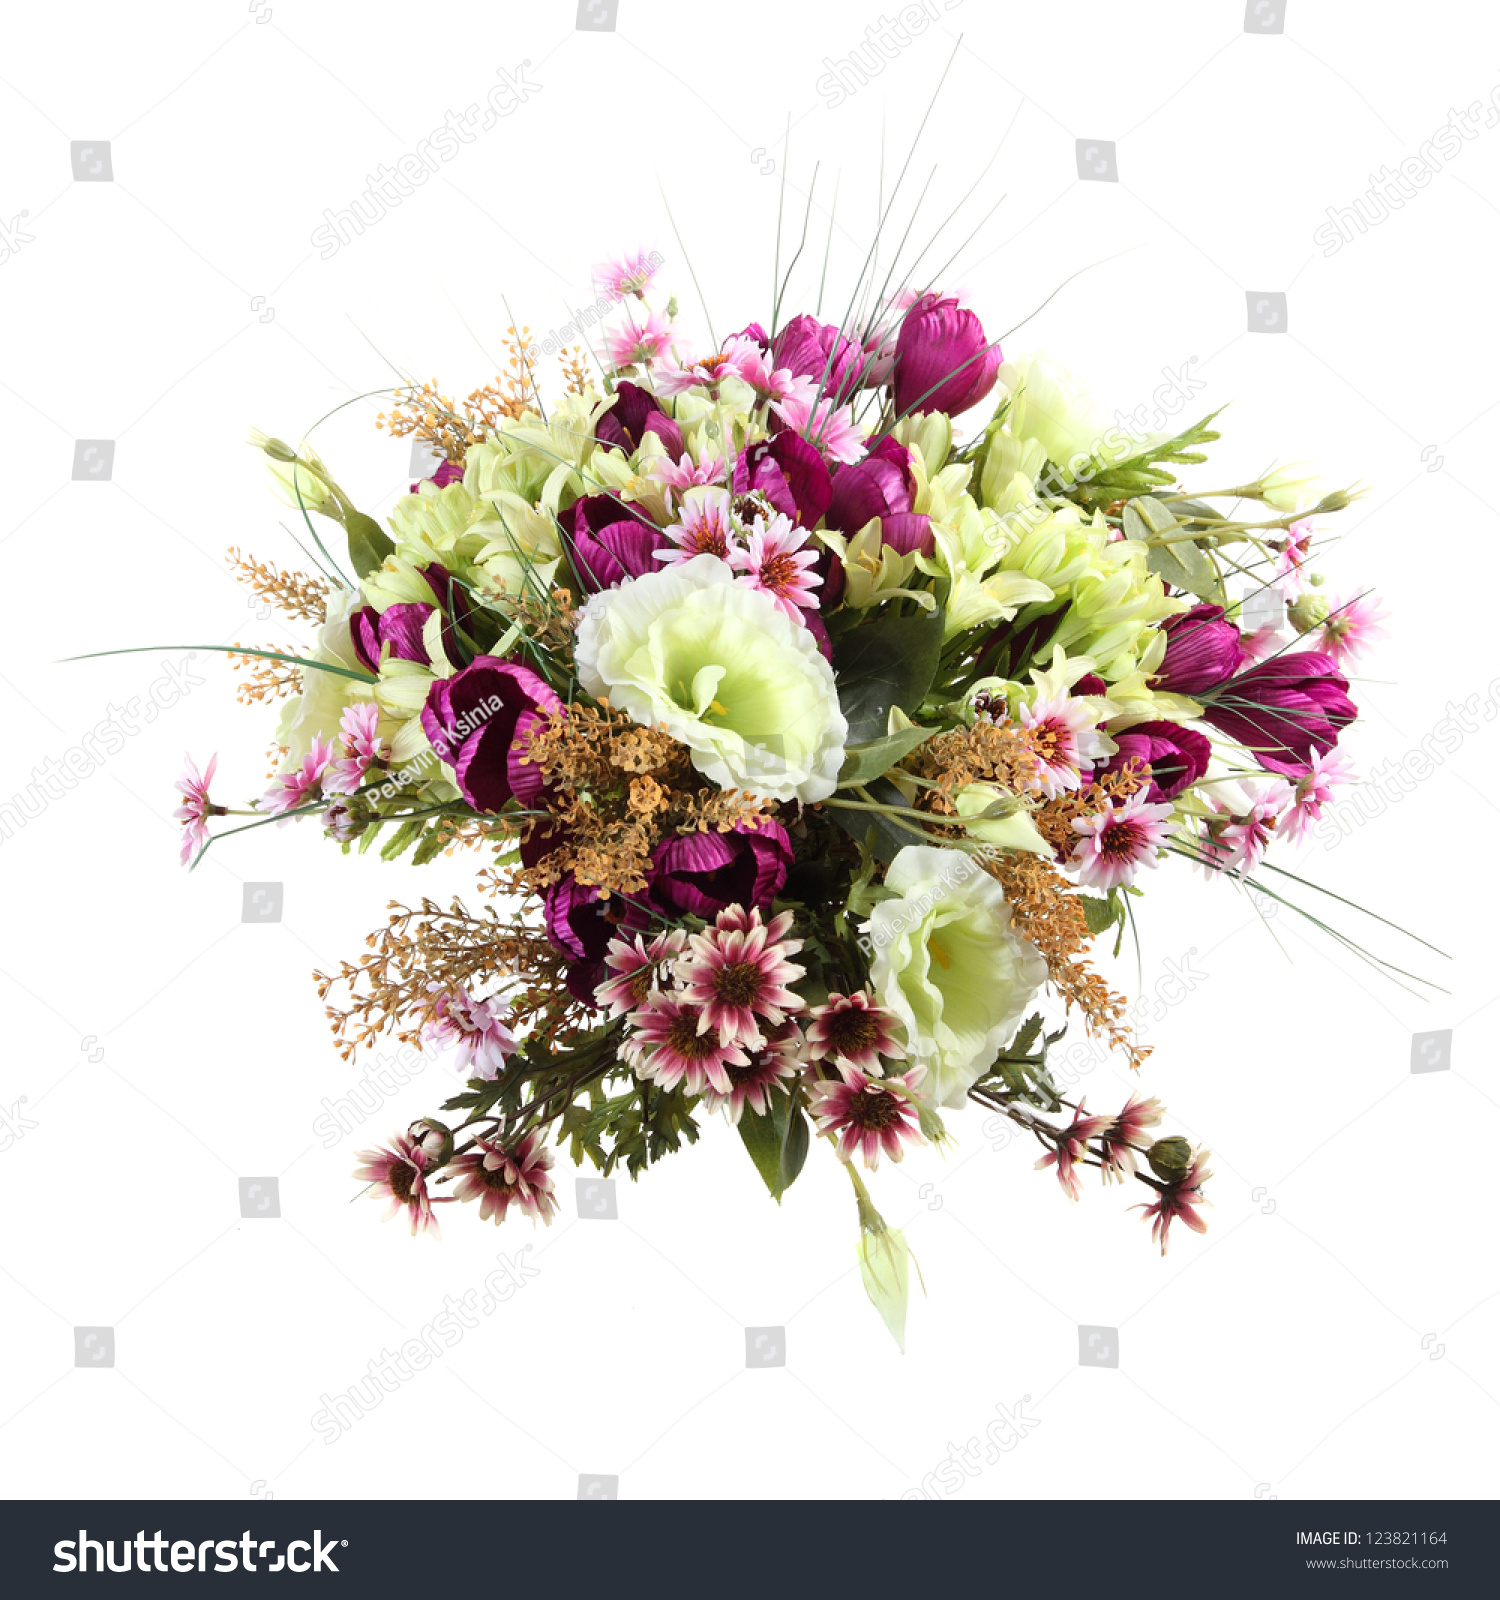 Bouquet Of Artificial Flowers On A White Background Stock Photo ...